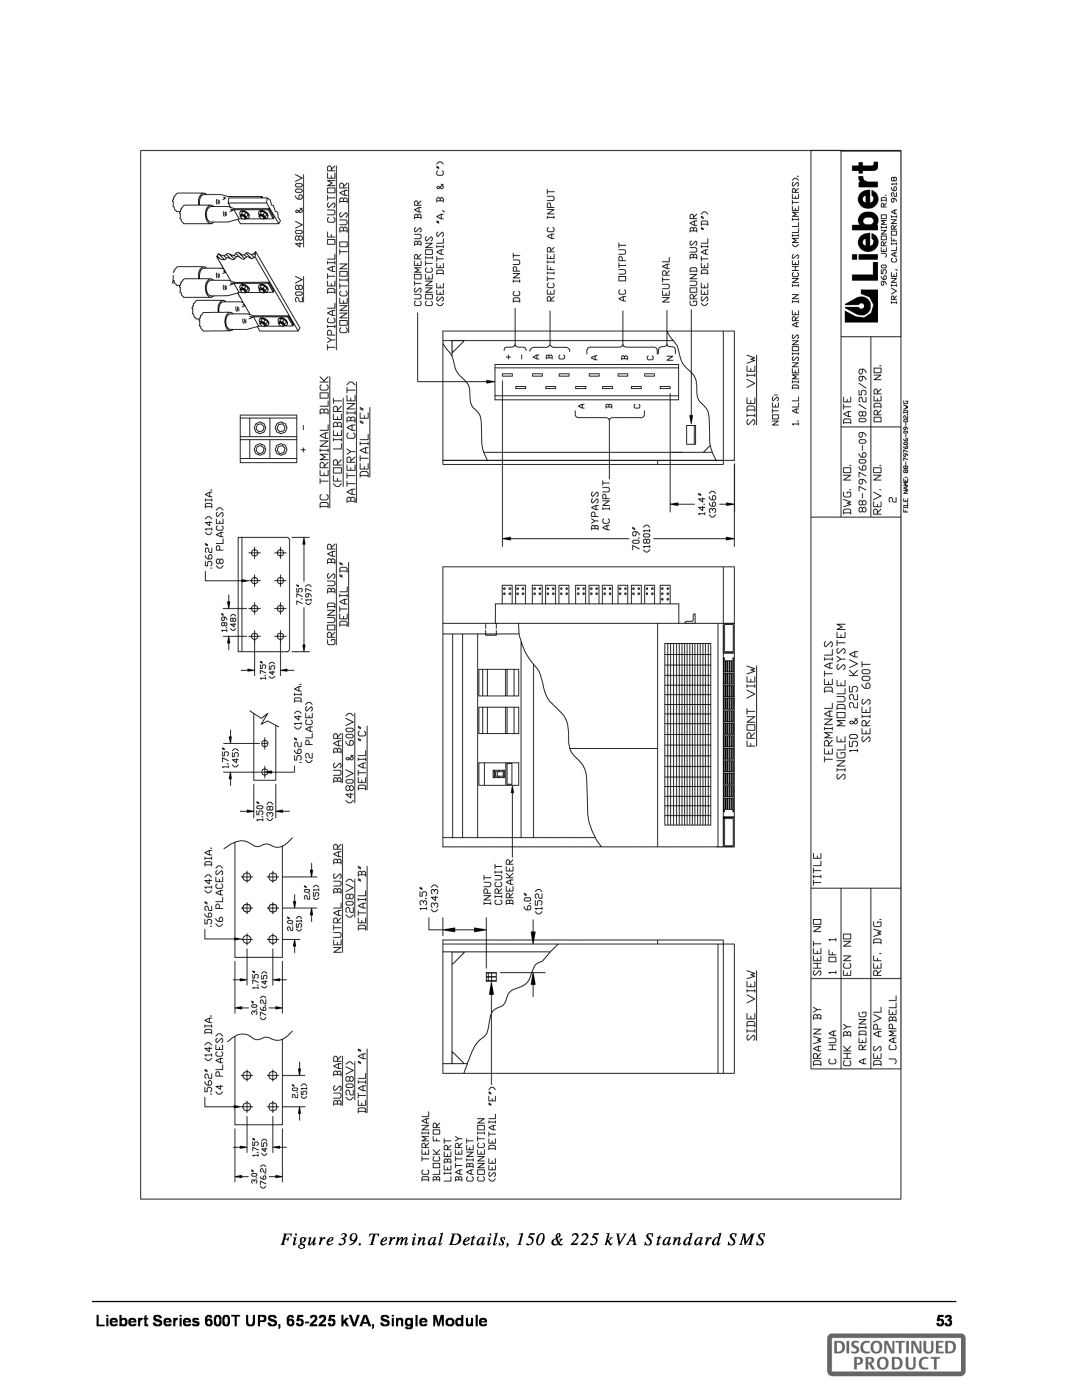 Emerson SERIES 600T manual Terminal Details, 150 & 225 kVA Standard SMS, Discontinued Product 